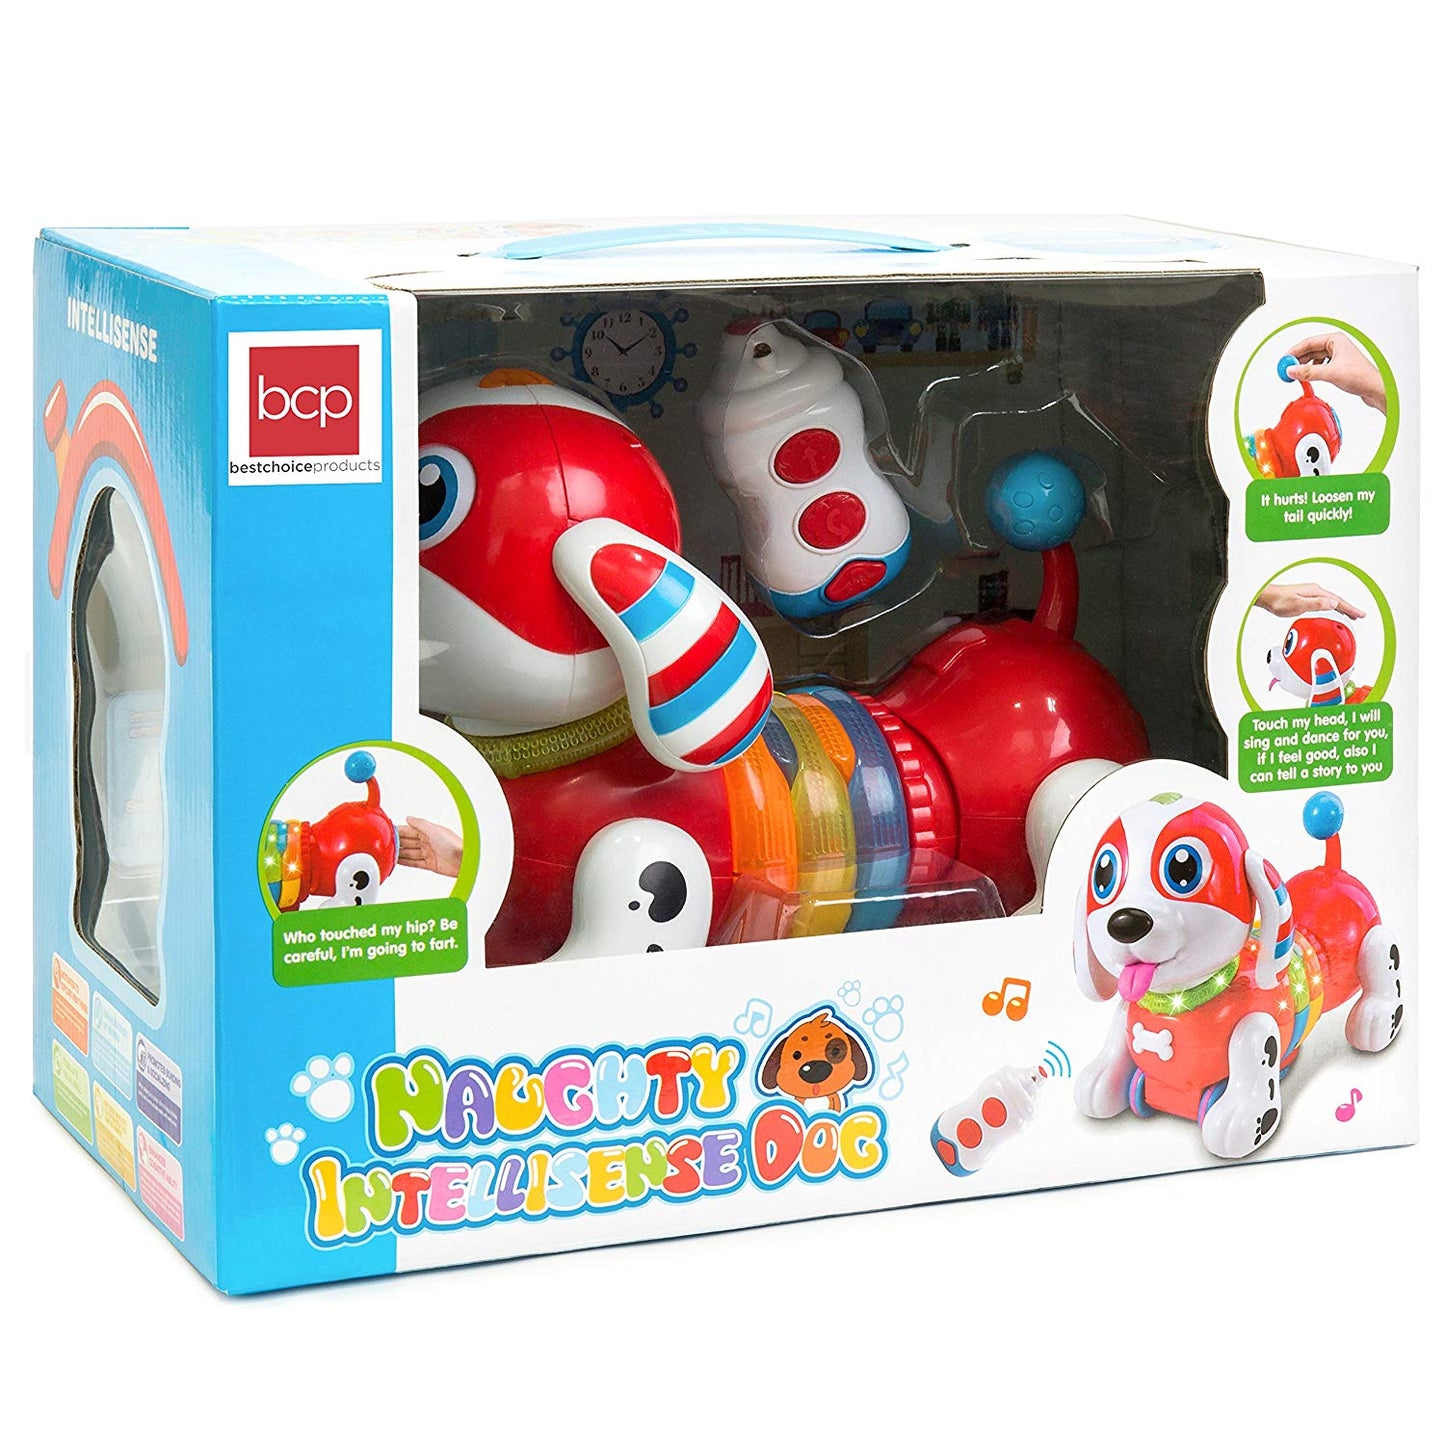 Kids Interactive Dancing RC Robotic Toy Dog w/ Music, Lights, Catchphrases, Touch Responsive